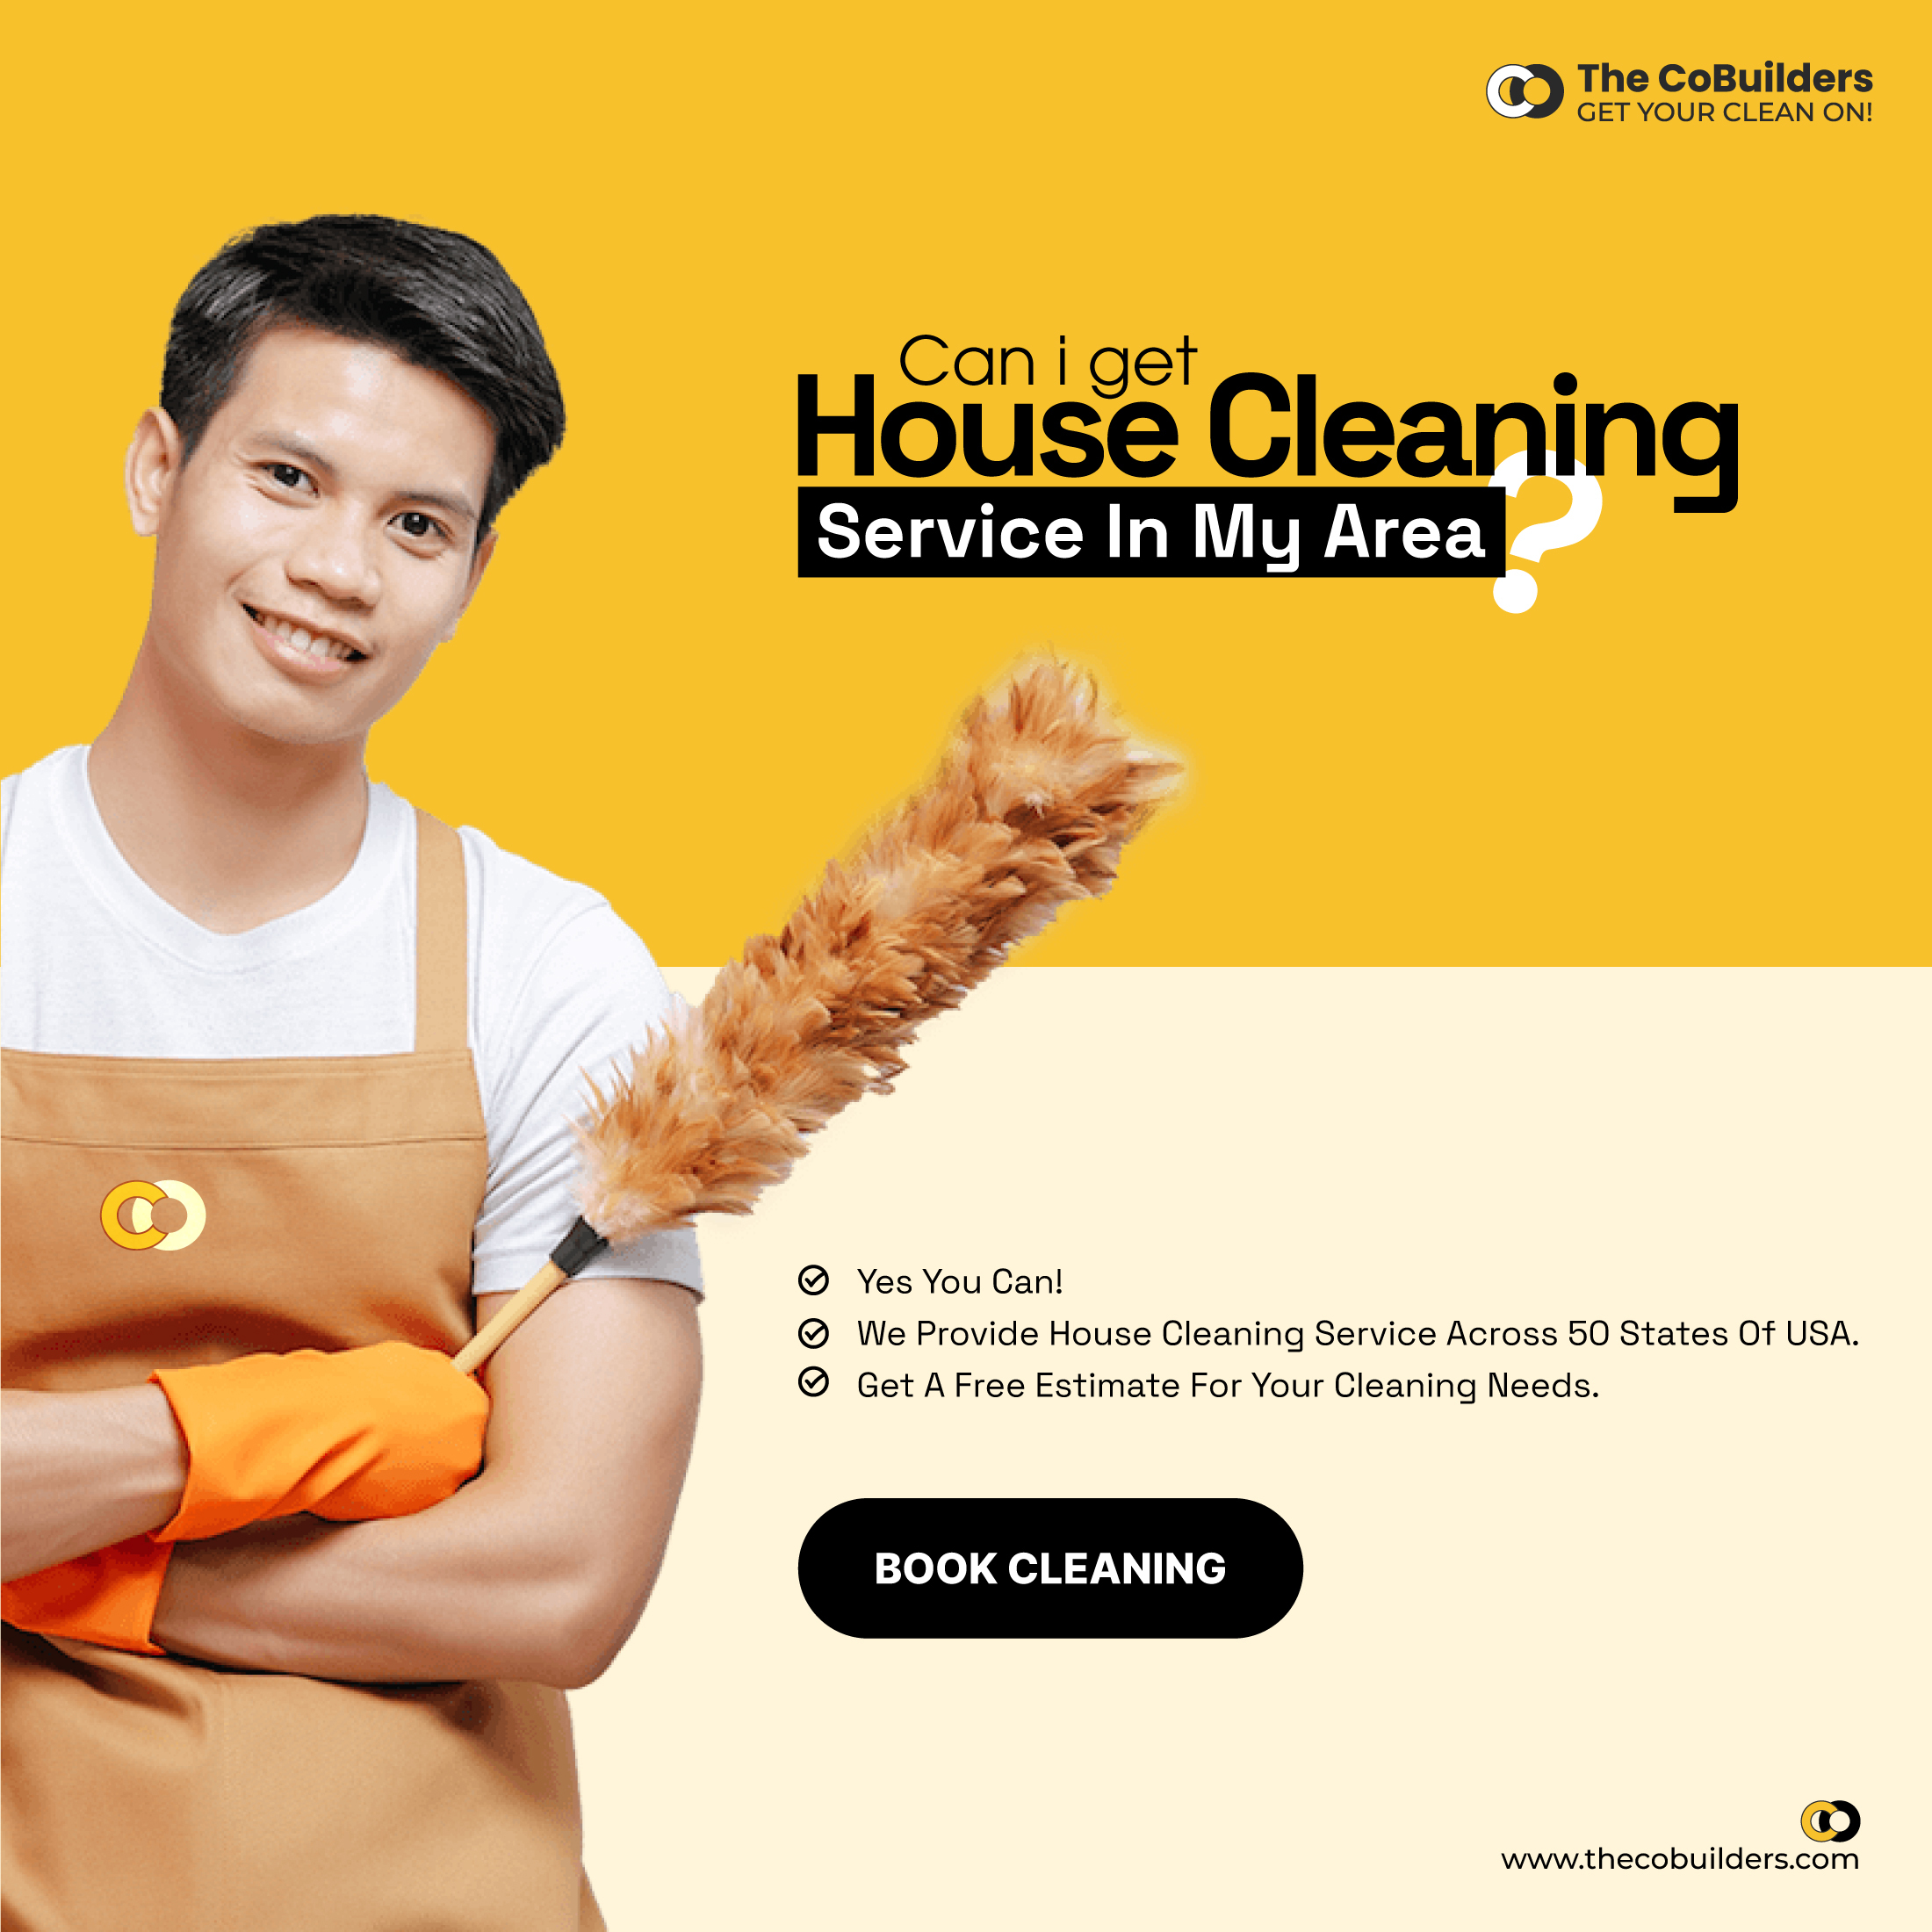 cobuilders cleaner looking for a job in your area.